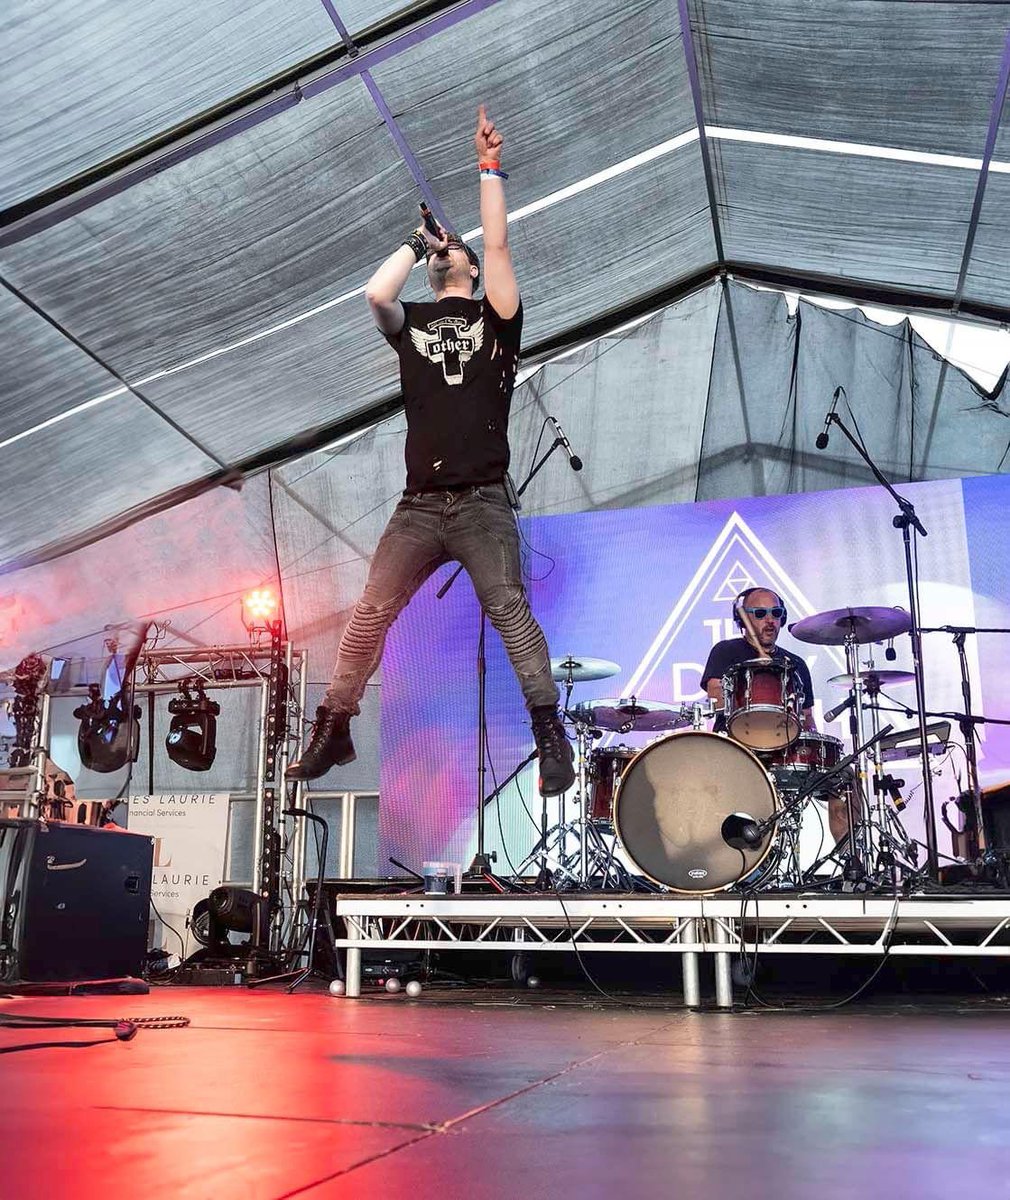 Steven Wodecki lead singer @TheDirtySmooth jumping high at @minetyfestival last weekend celebrating a great show. erichobsonphotography.co.uk